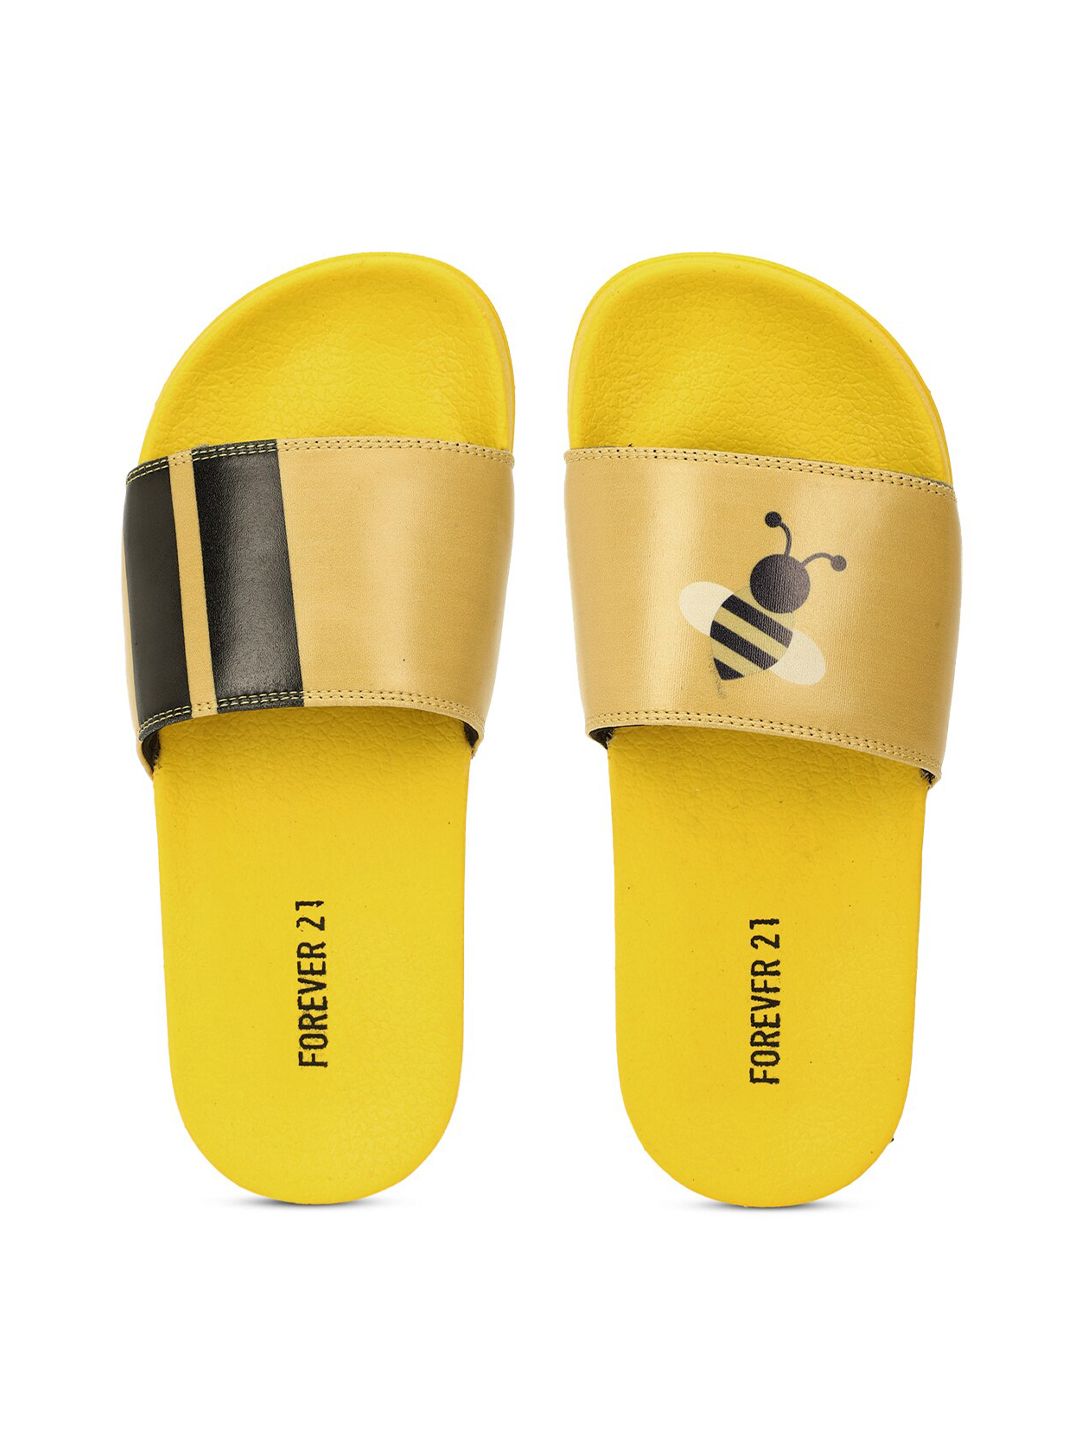 FOREVER 21 Women Yellow & Gold-Toned Printed Sliders Price in India